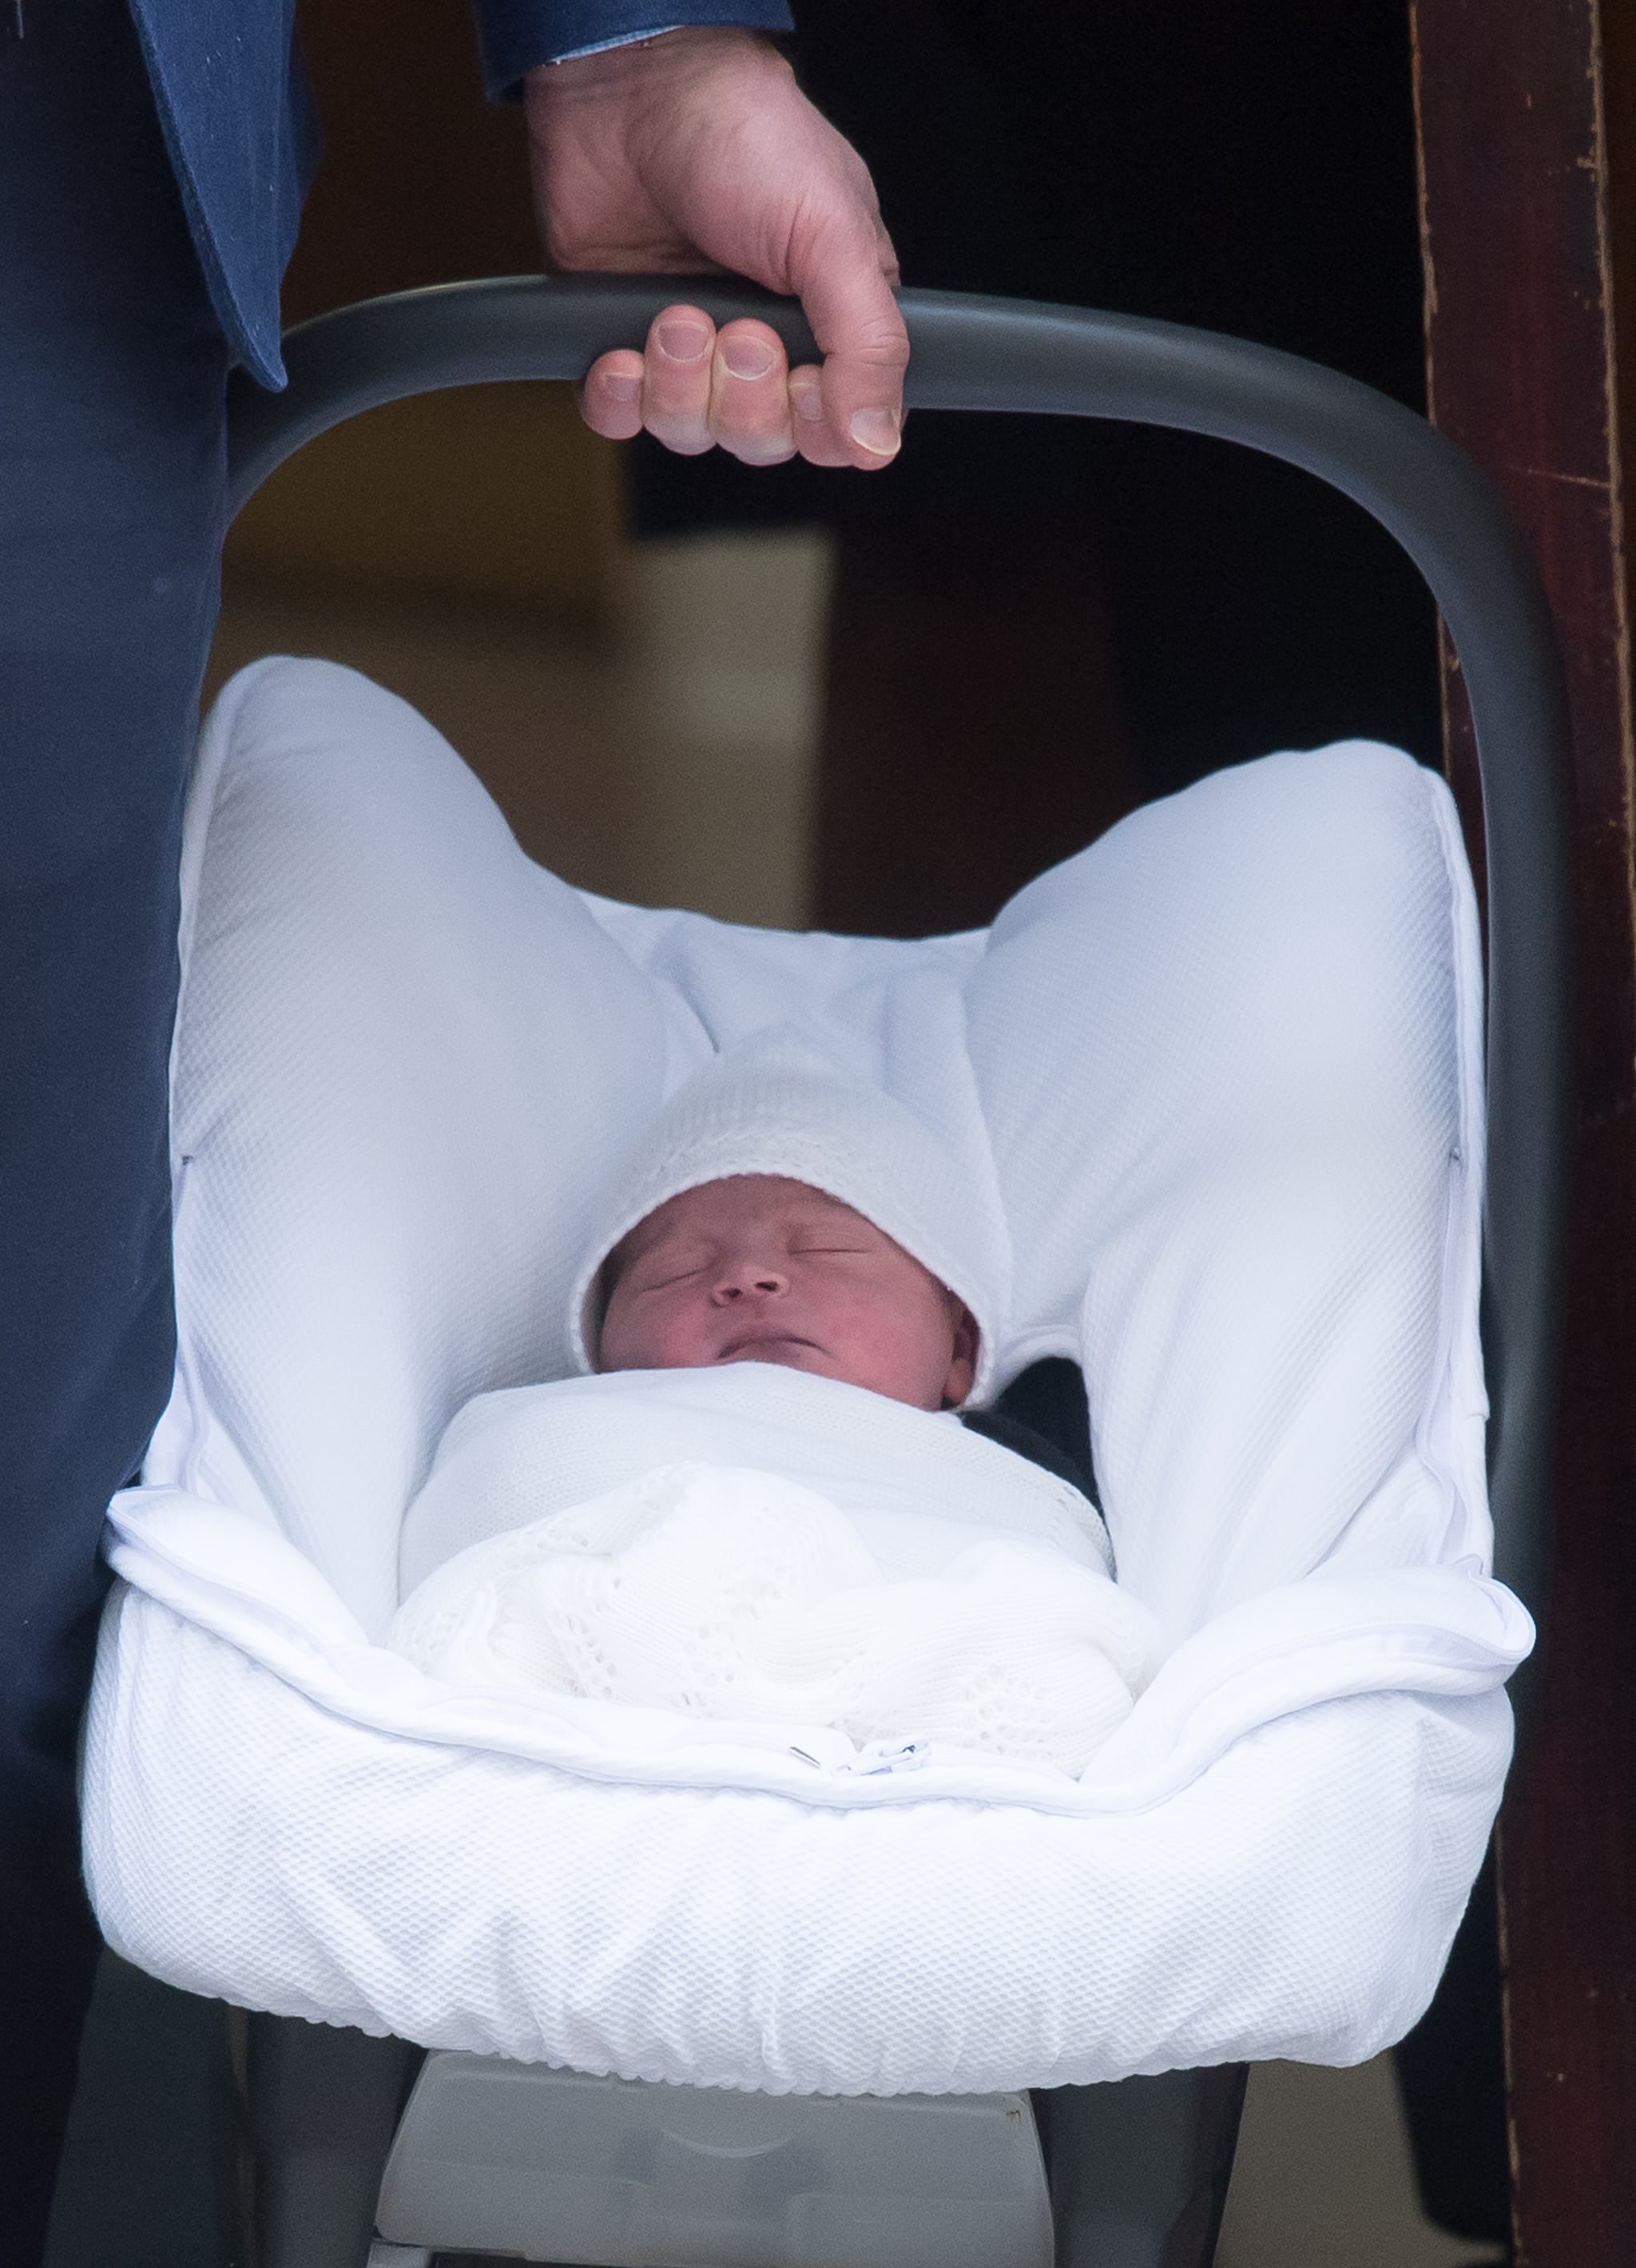 LONDON, ENGLAND - APRIL 23:  The newborn royal baby is seen as Catherine, Duchess of Cambridge and Prince William, Duke of Cambridge depart the Lindo Wing with their newborn son at St Mary's Hospital on April 23, 2018 in London, England. The Duchess safely delivered a son at 11:01 am, weighing 8lbs 7oz, who will be fifth in line to the throne.  (Photo by Samir Hussein/WireImage)